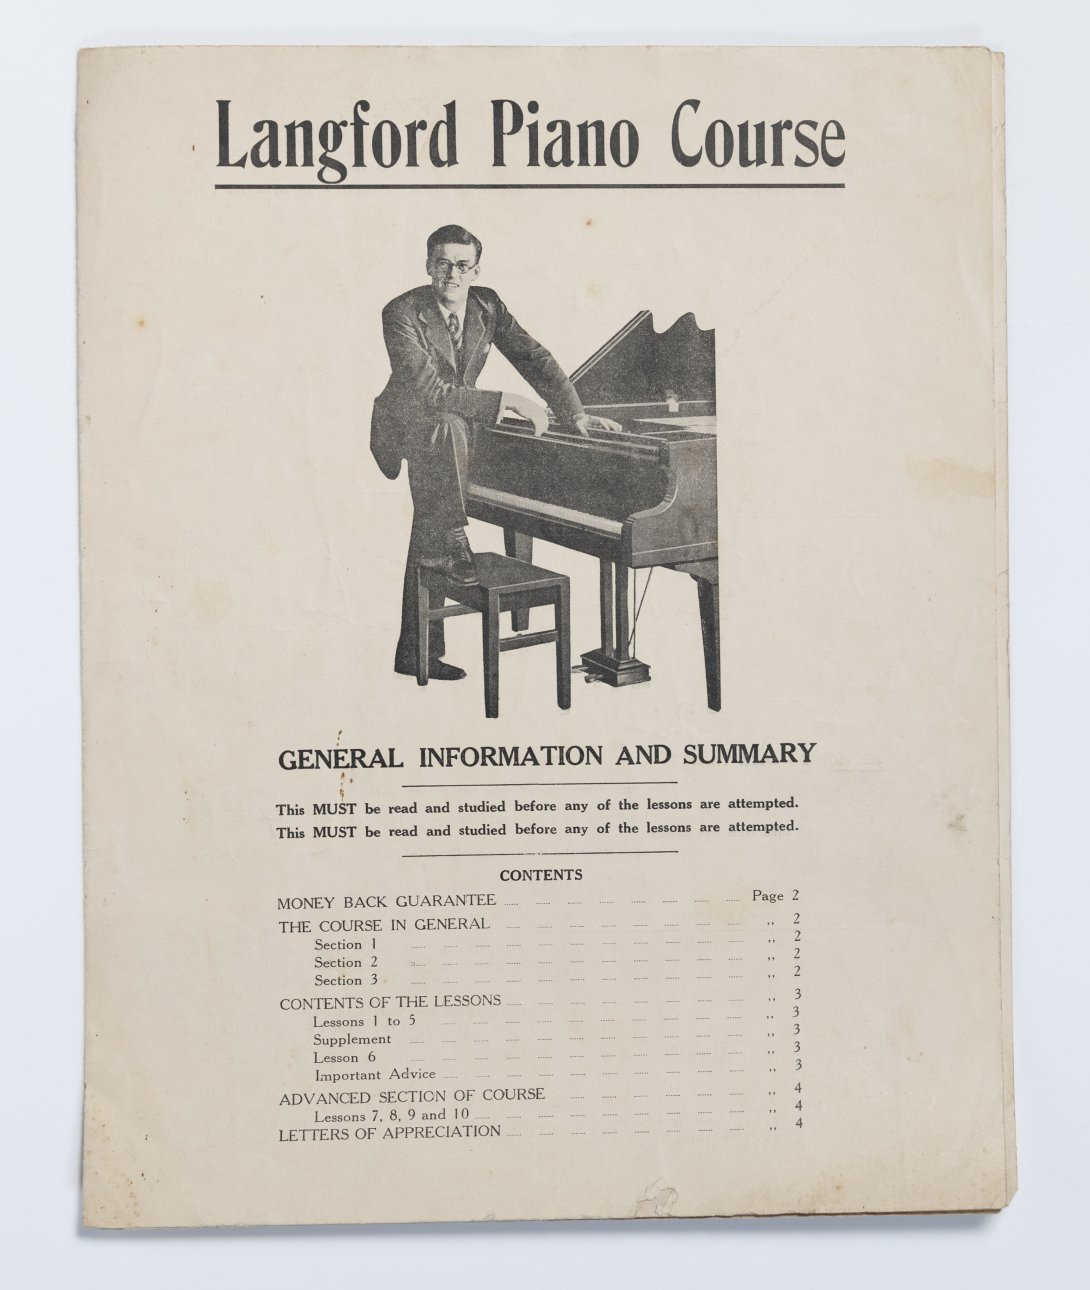 Image of the title page cover of a music text book featuring an image of a man with his foot on the stool of a piano, looking at the camera. 